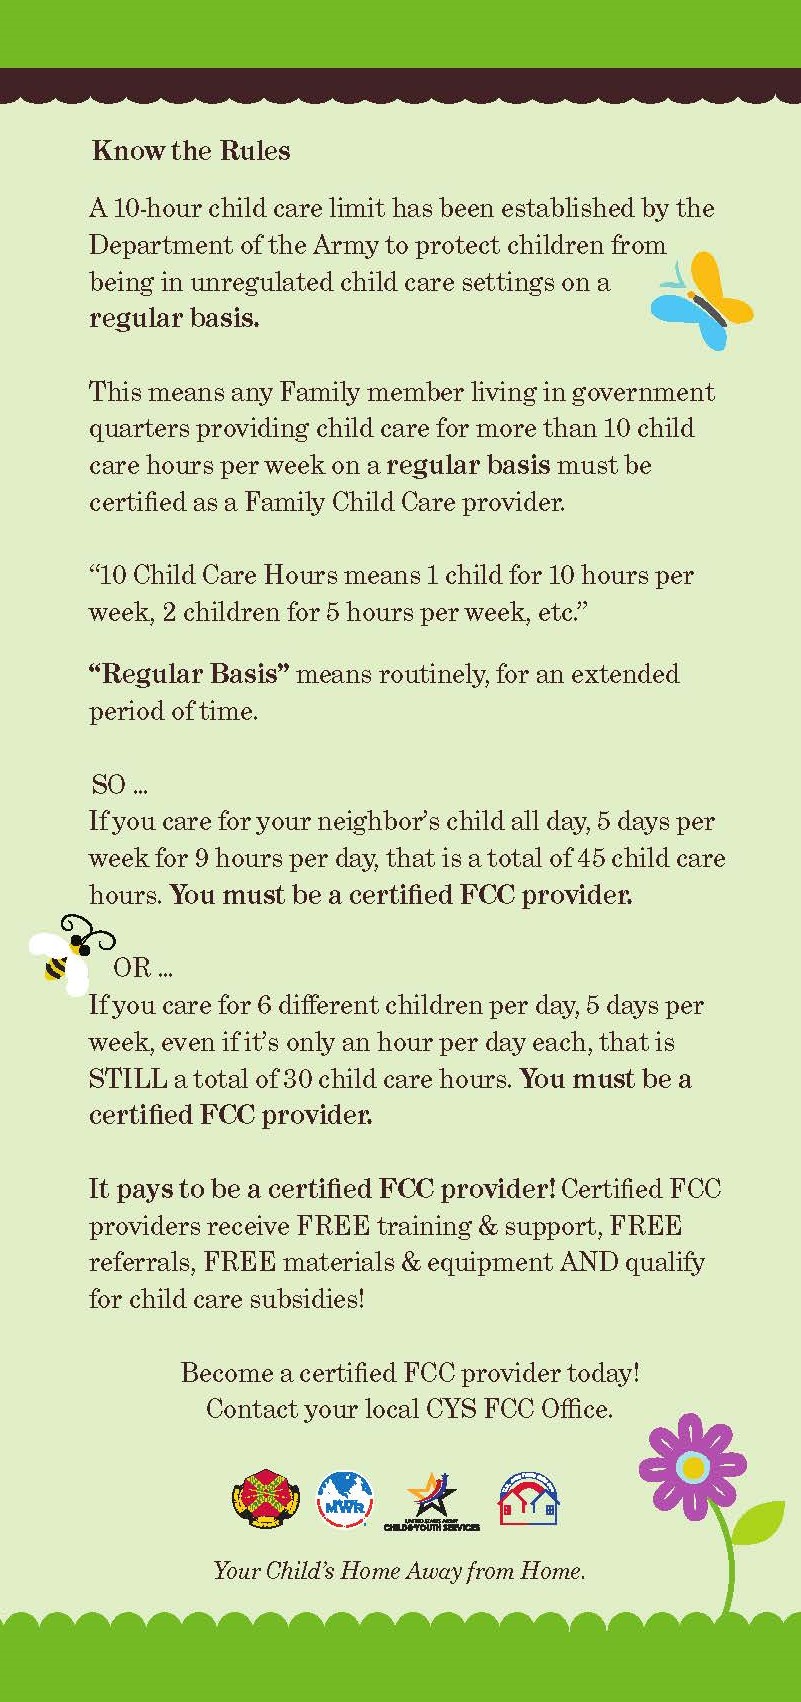 FCC Green flyer to be neighborly_Page_2.jpg